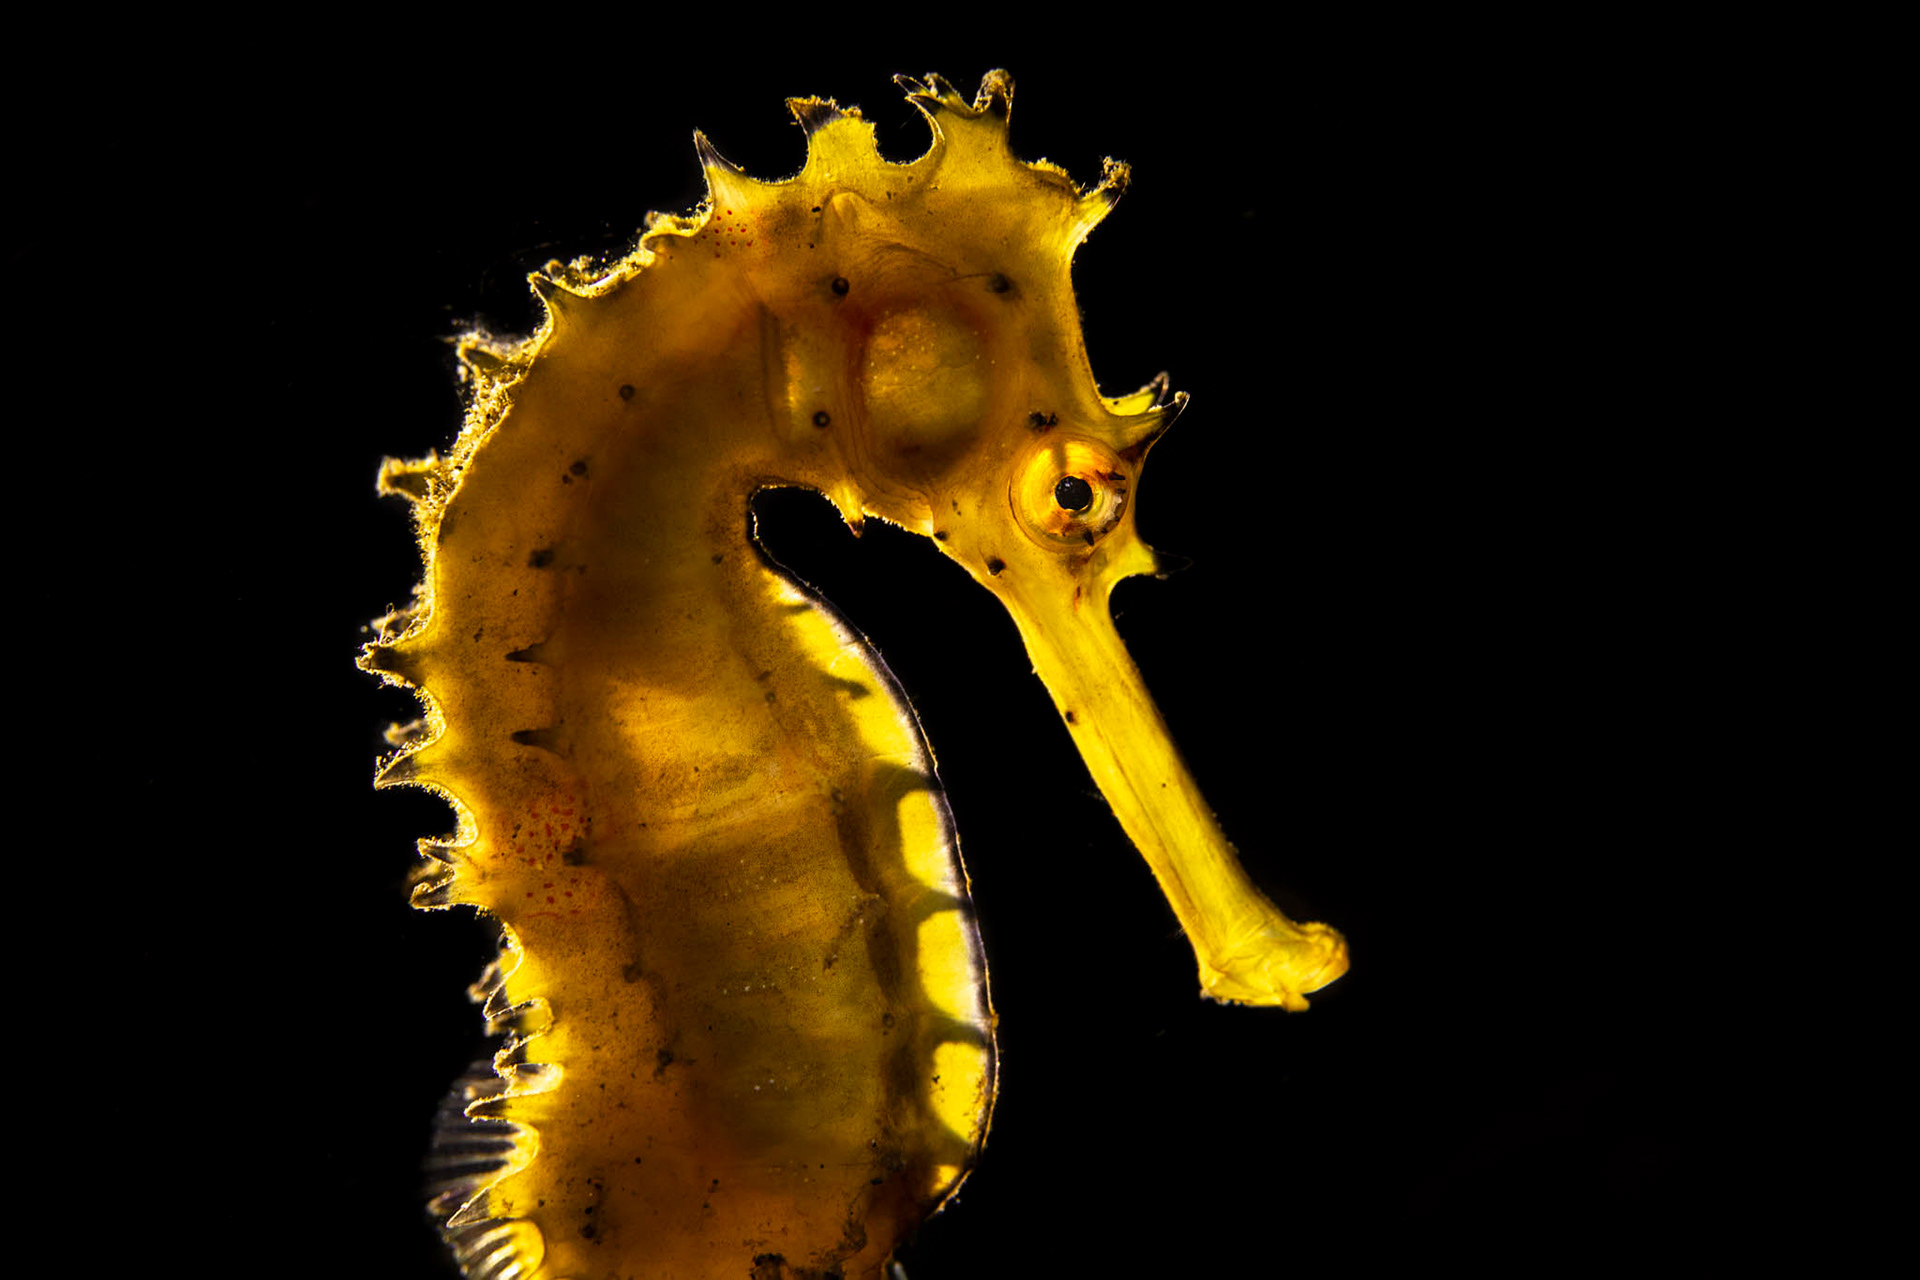 Tobias Friedrich’s Old Canon DSLR Captures Critters of the Deep Seas